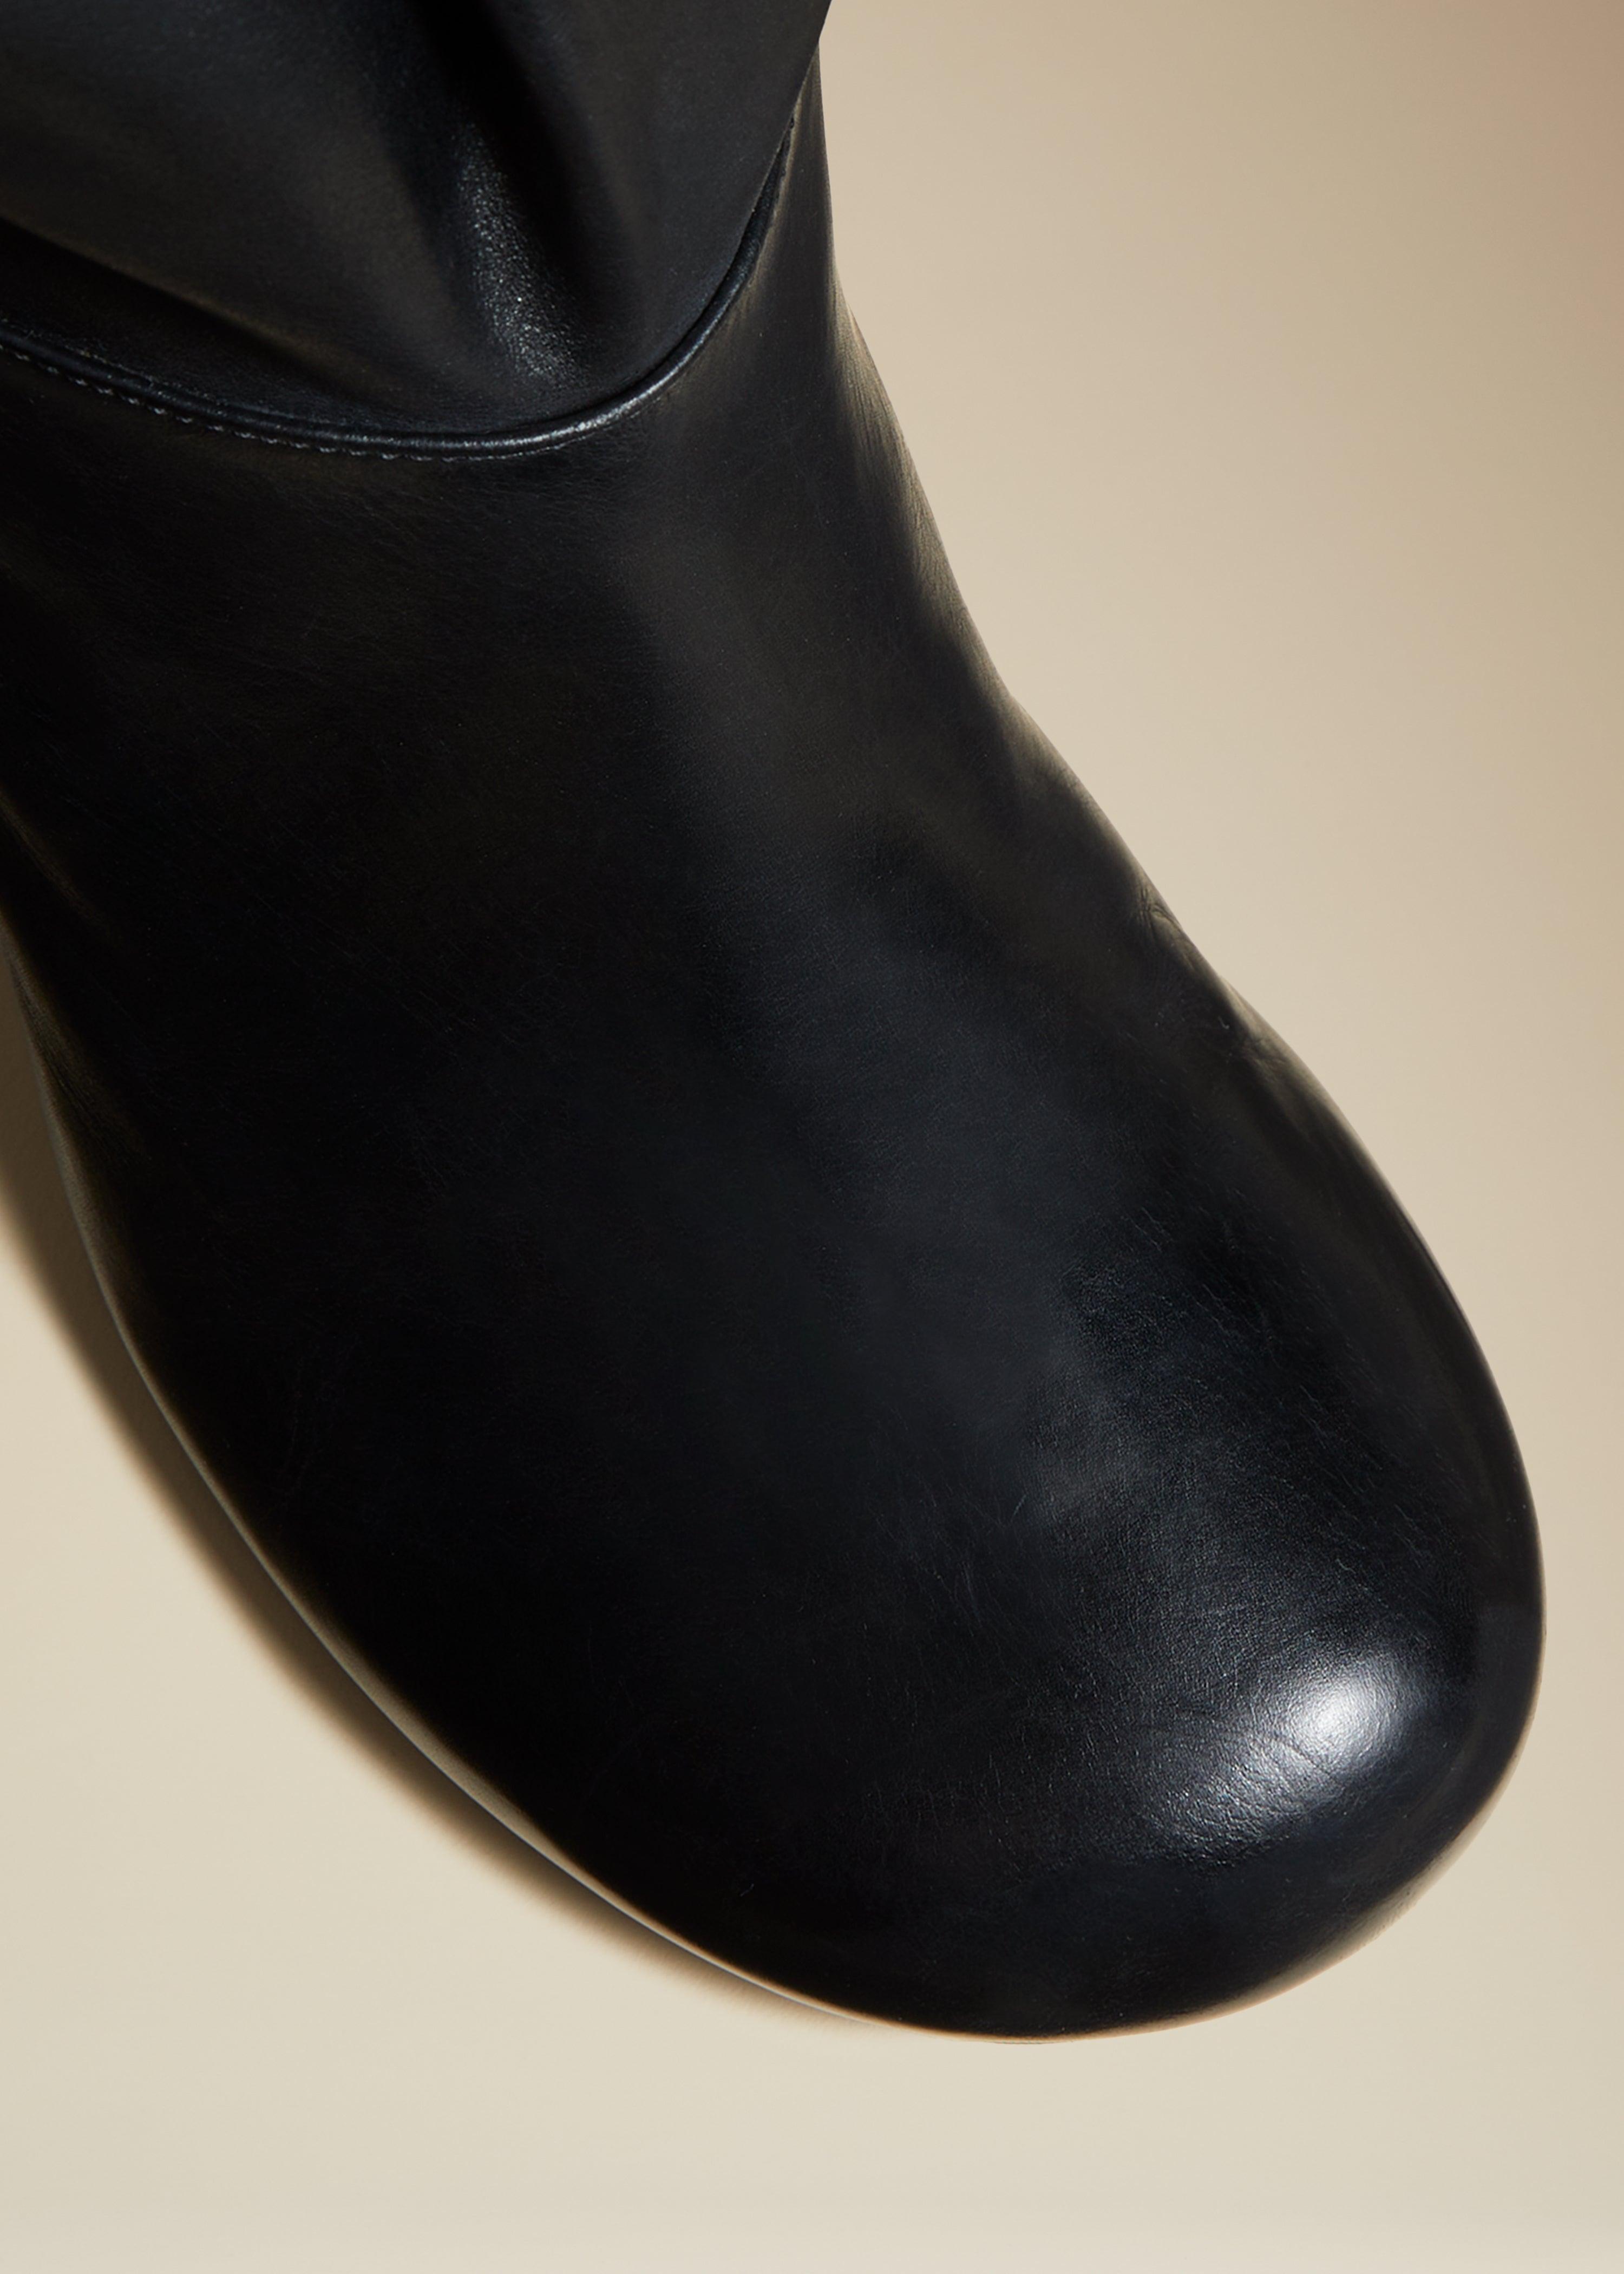 The Admiral Knee-High Boot in Black Leather - The Iconic Issue